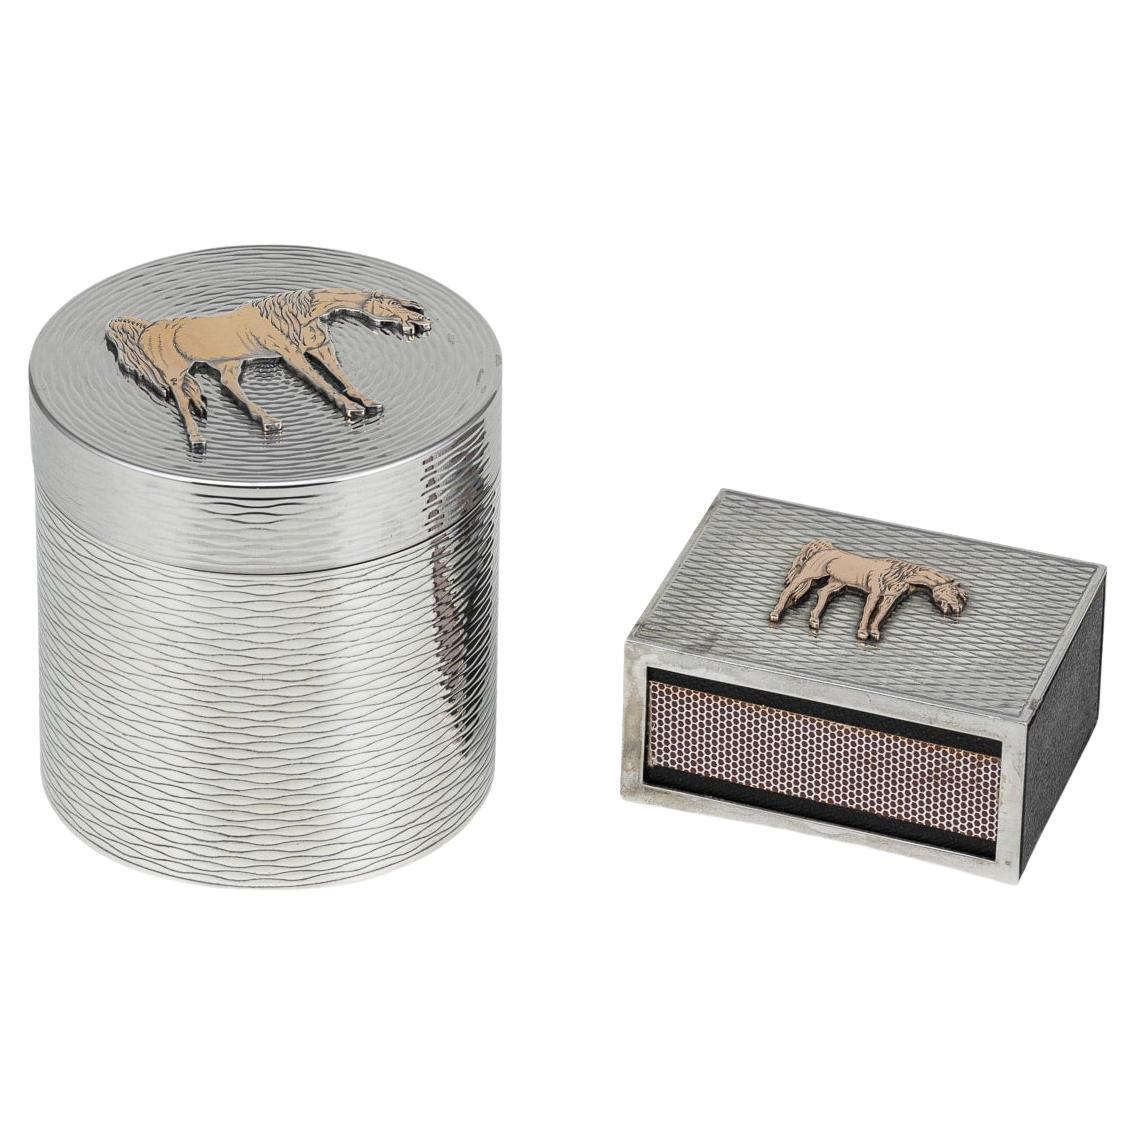 Hermes Solid Silver Cigarette Box & Matchbox With Gold Horse Detail c.1960 For Sale